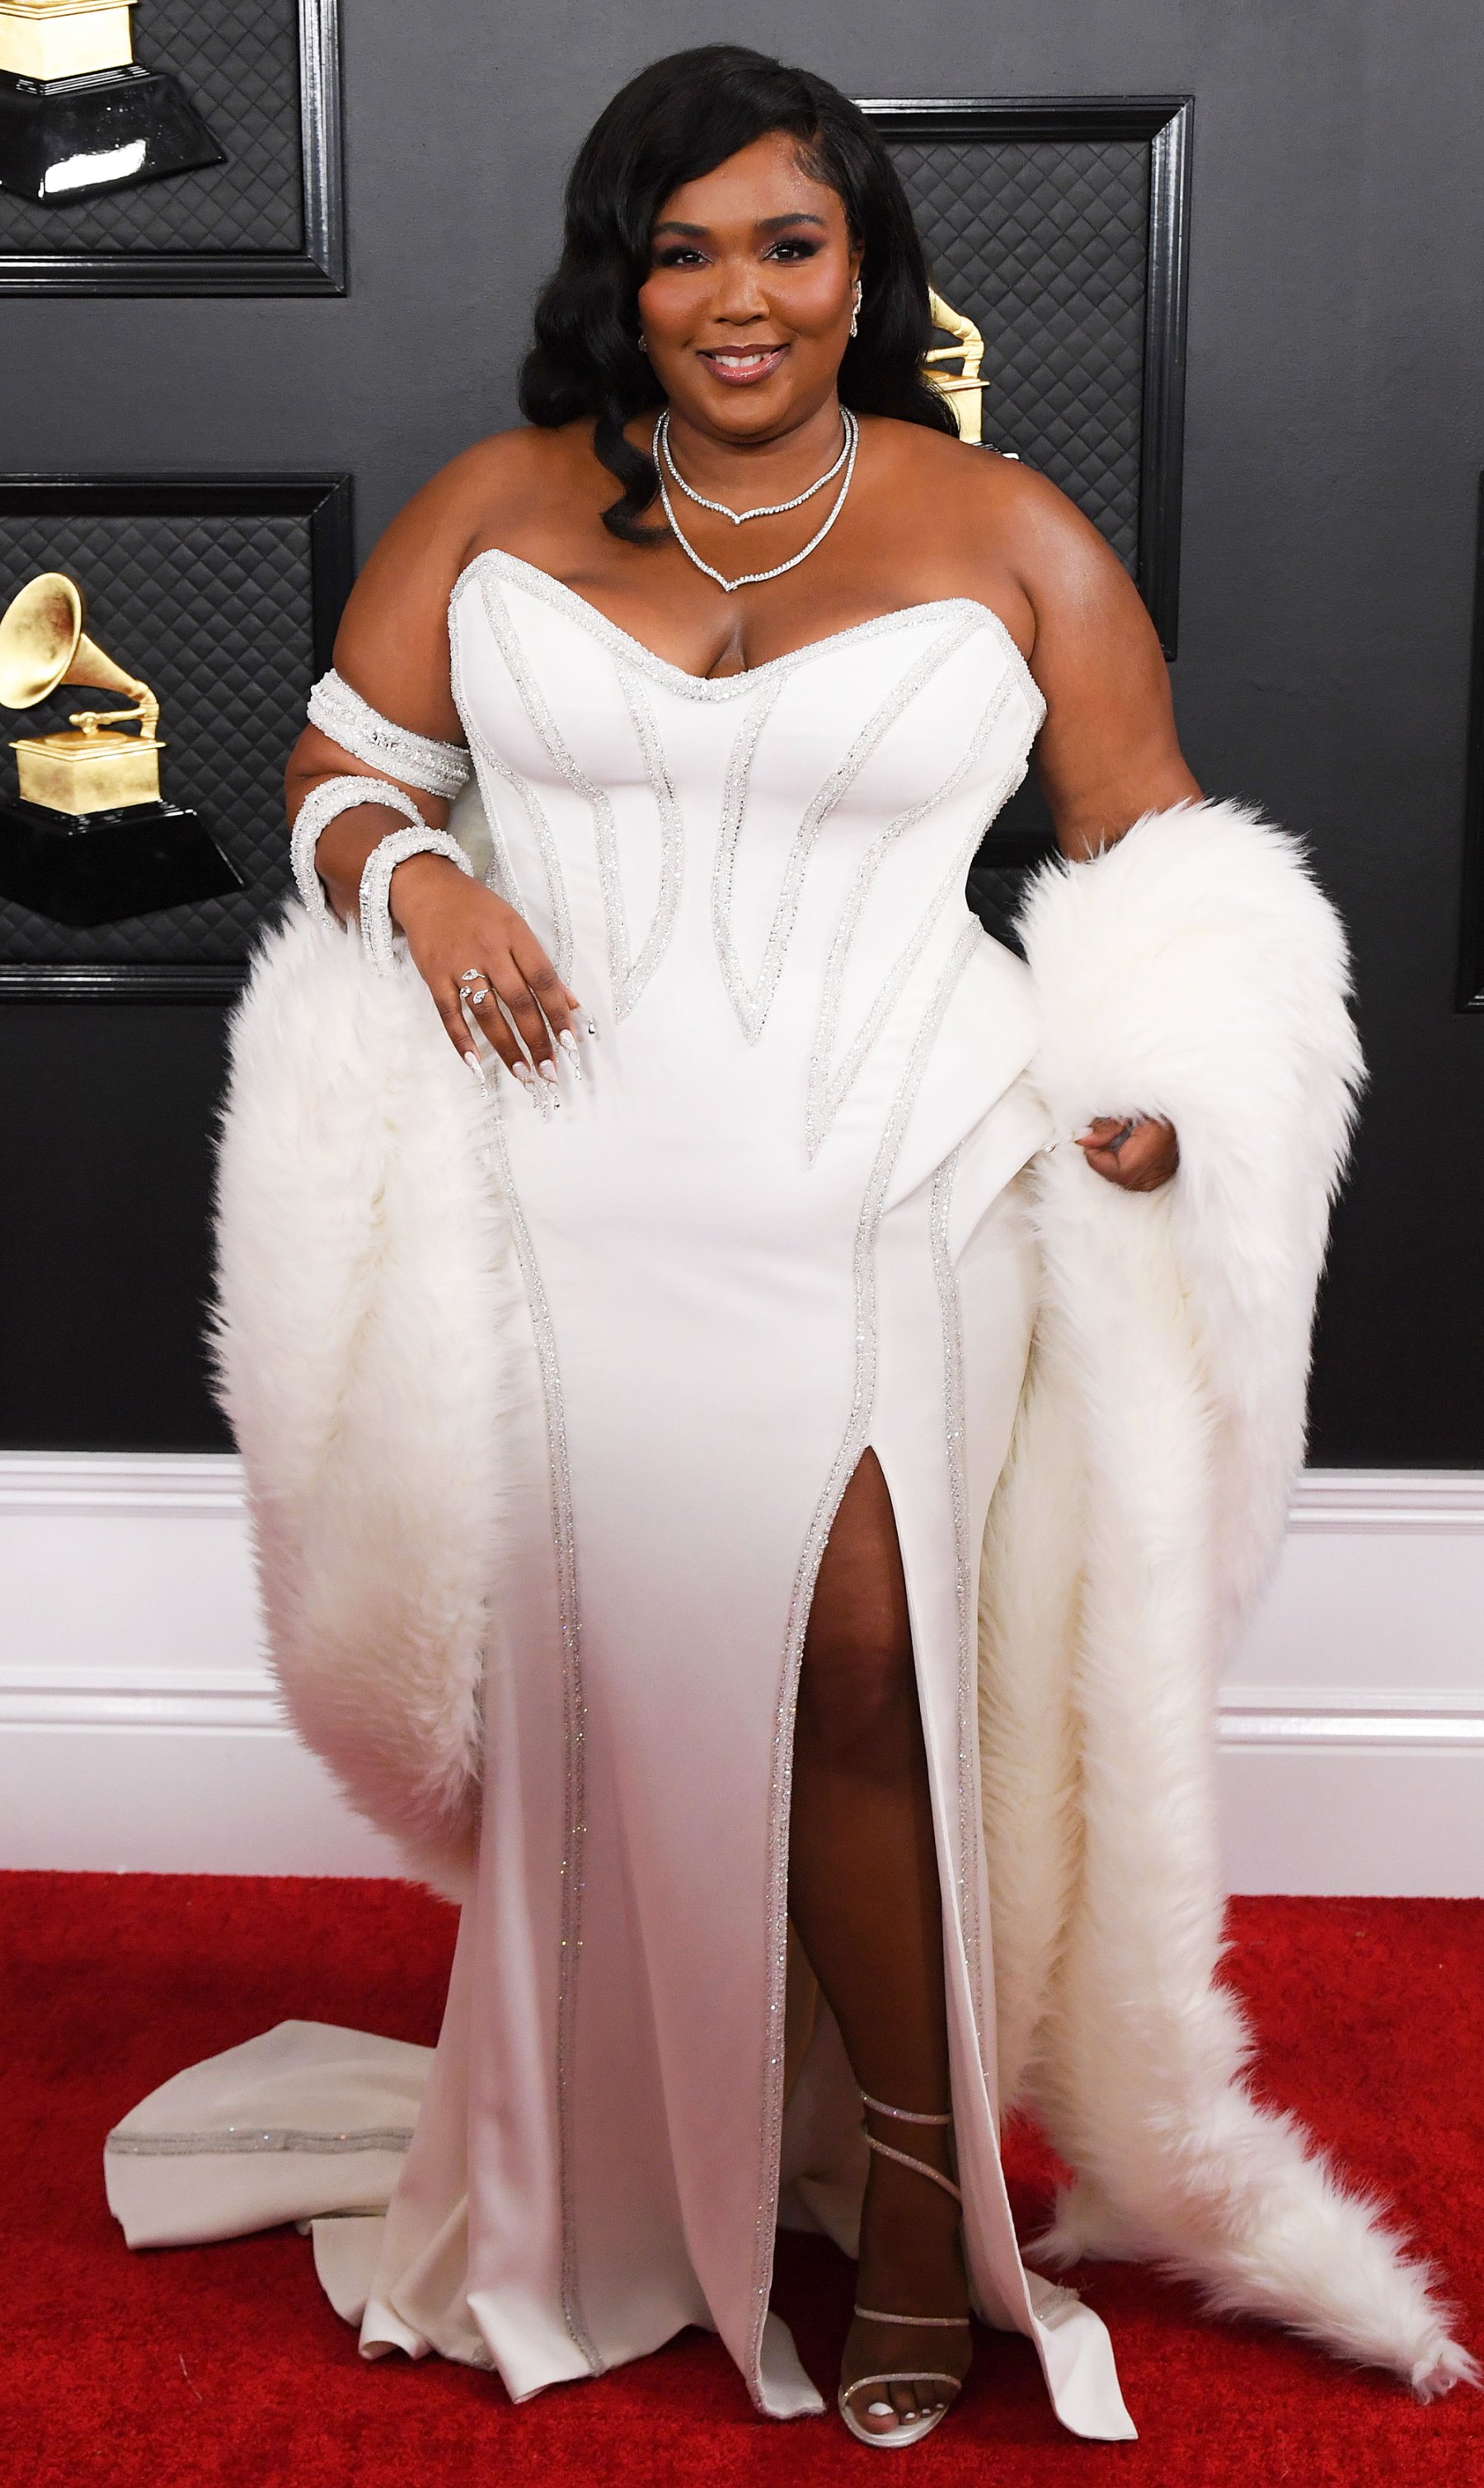 Grammys 2020 Lizzo's Versace Dress Inspired By Diana Ross